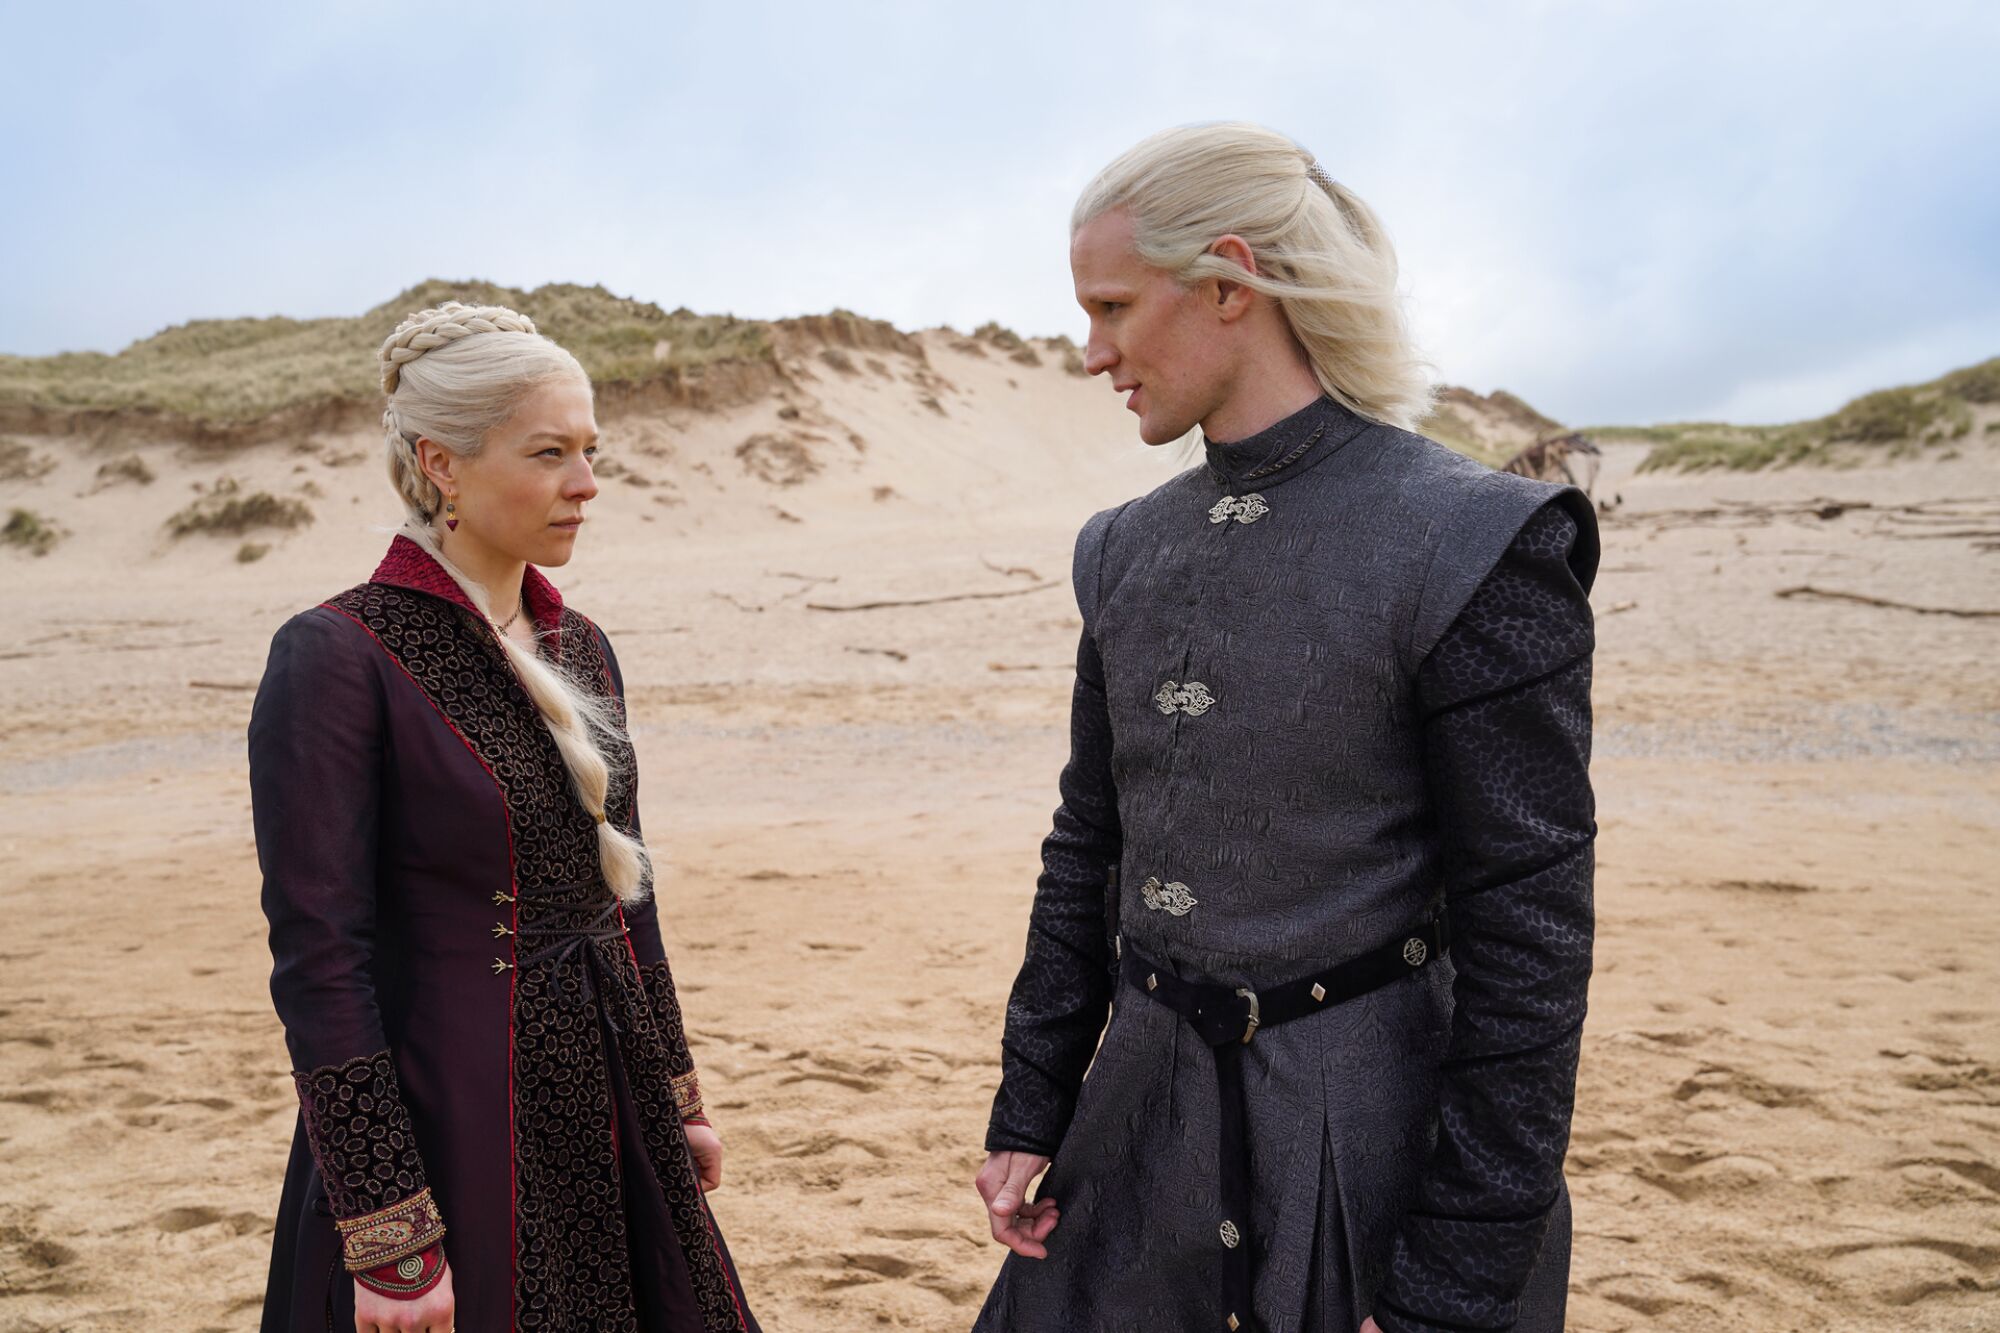 A white-blond man and woman in medieval costumes are standing on the beach and looking at each other.